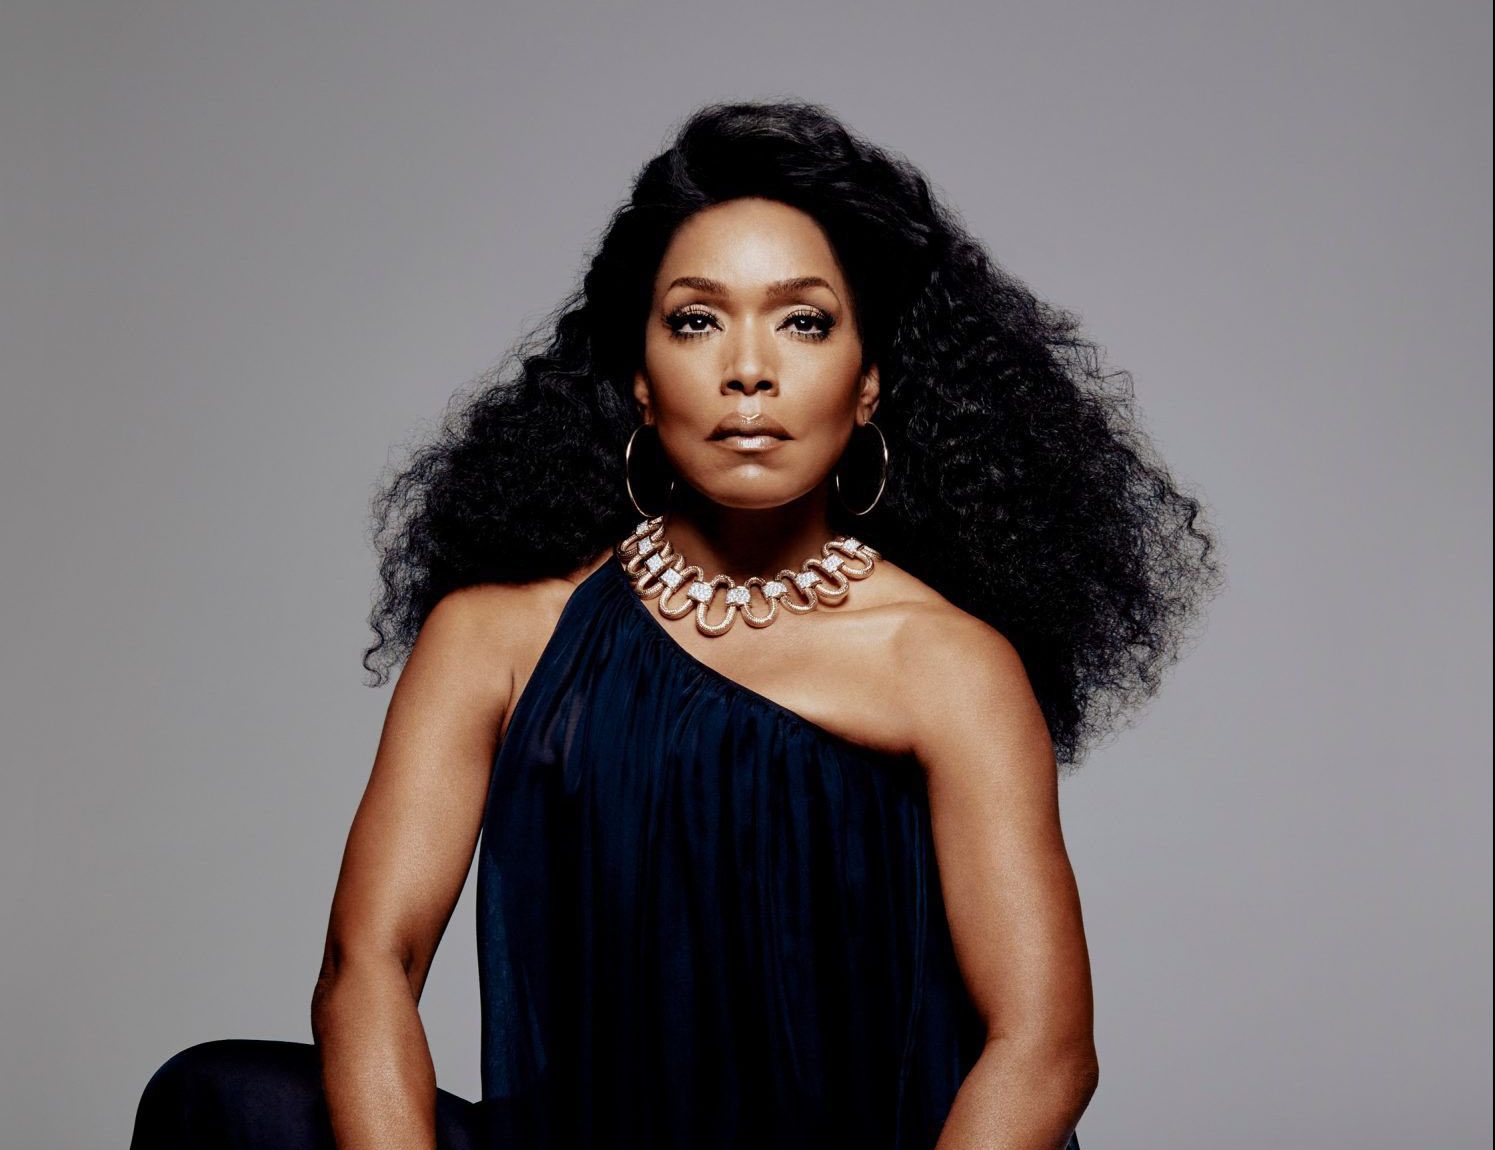 Angela Bassett to receive honorary Oscar at this year’s Governors Awards, fans react